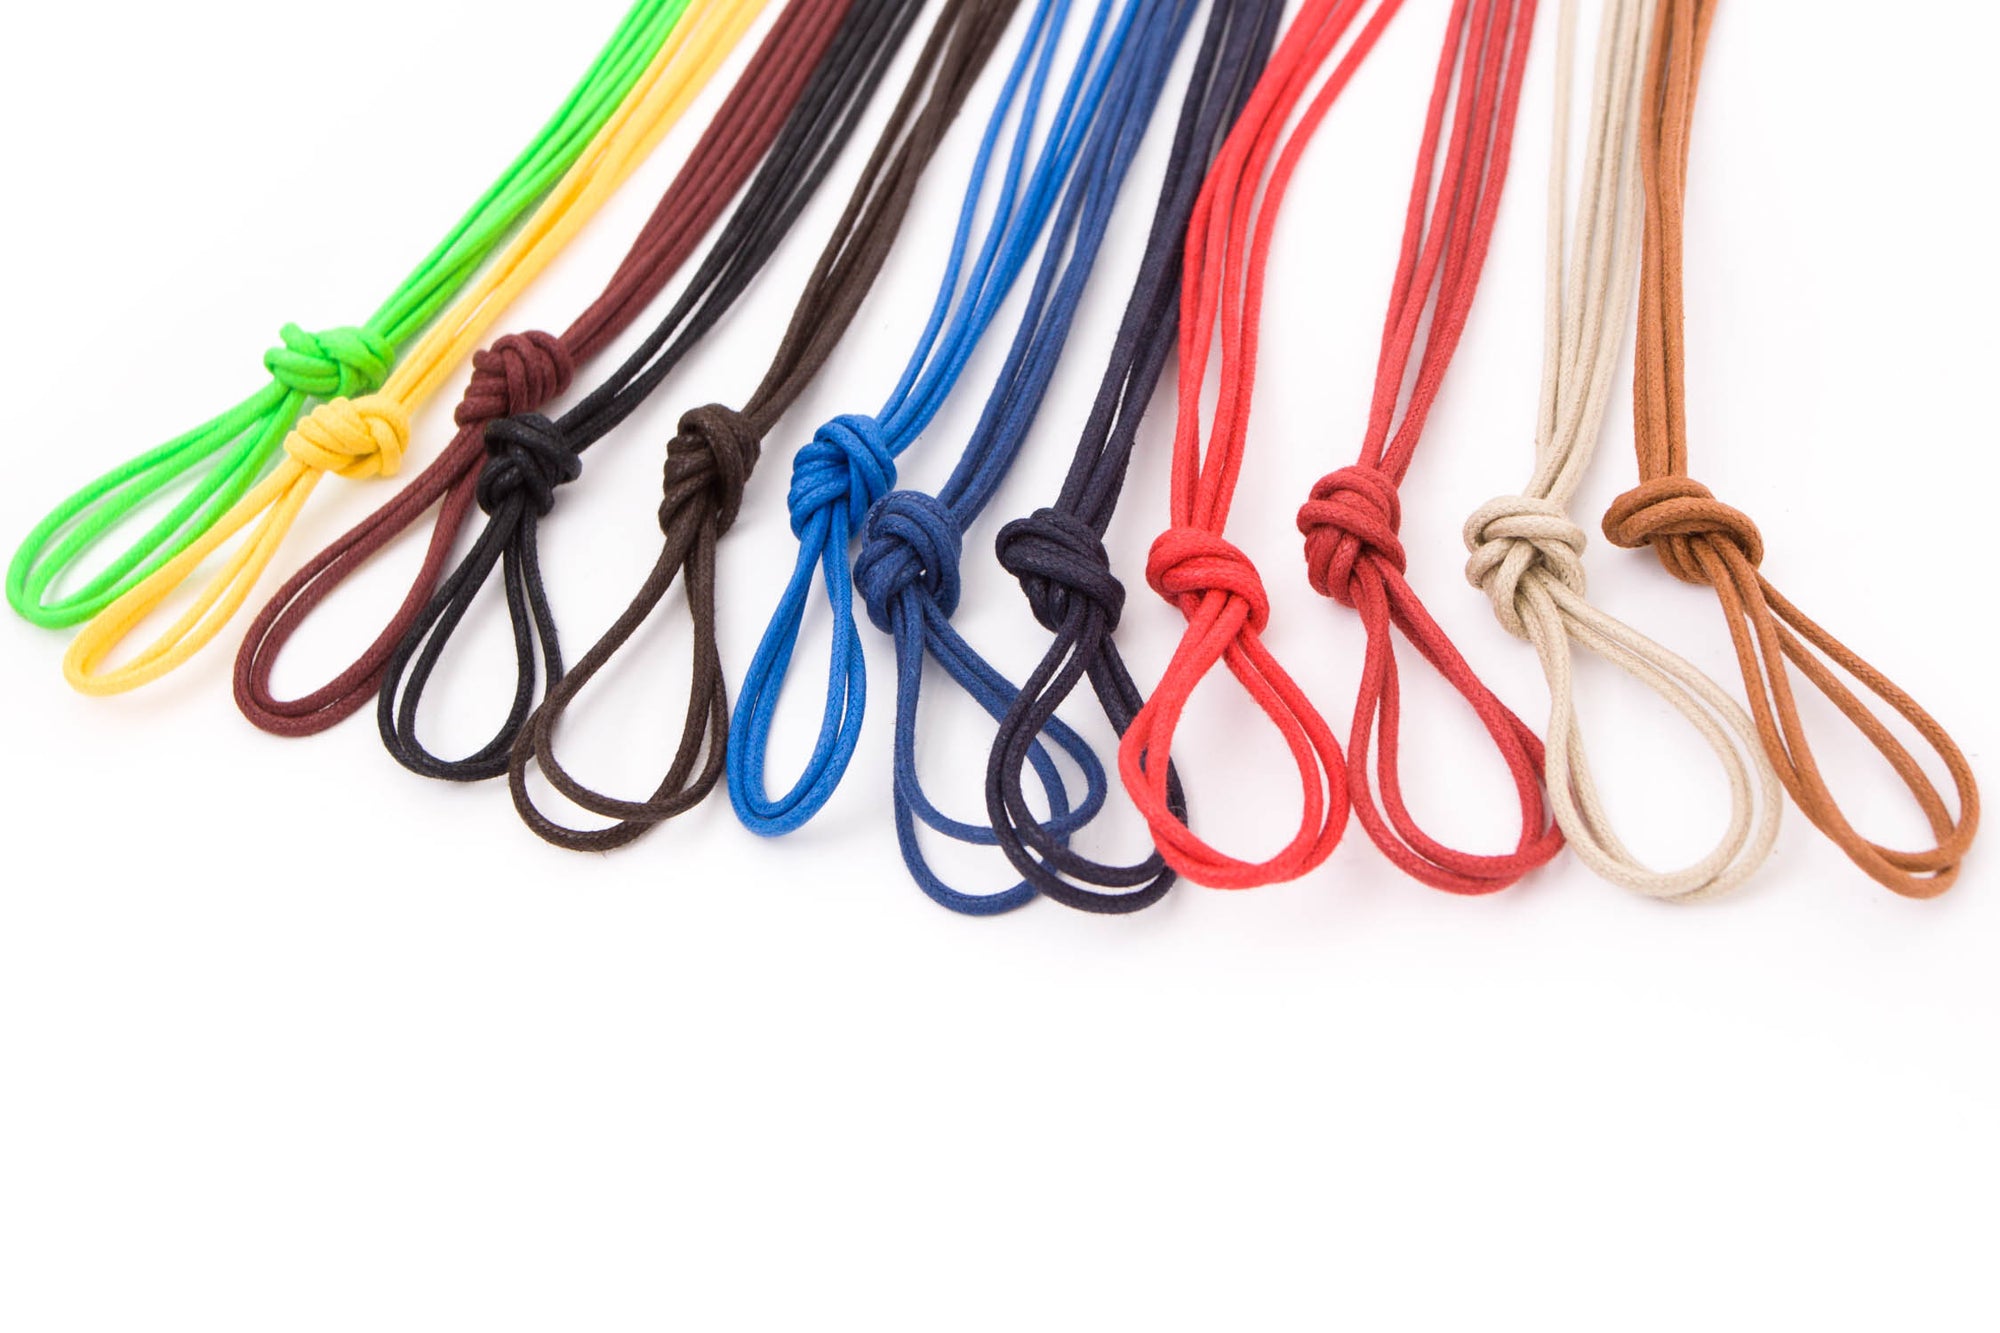 A group of Wellington Colored Round Waxed Shoelaces by KirbyAllison.com on a white background.